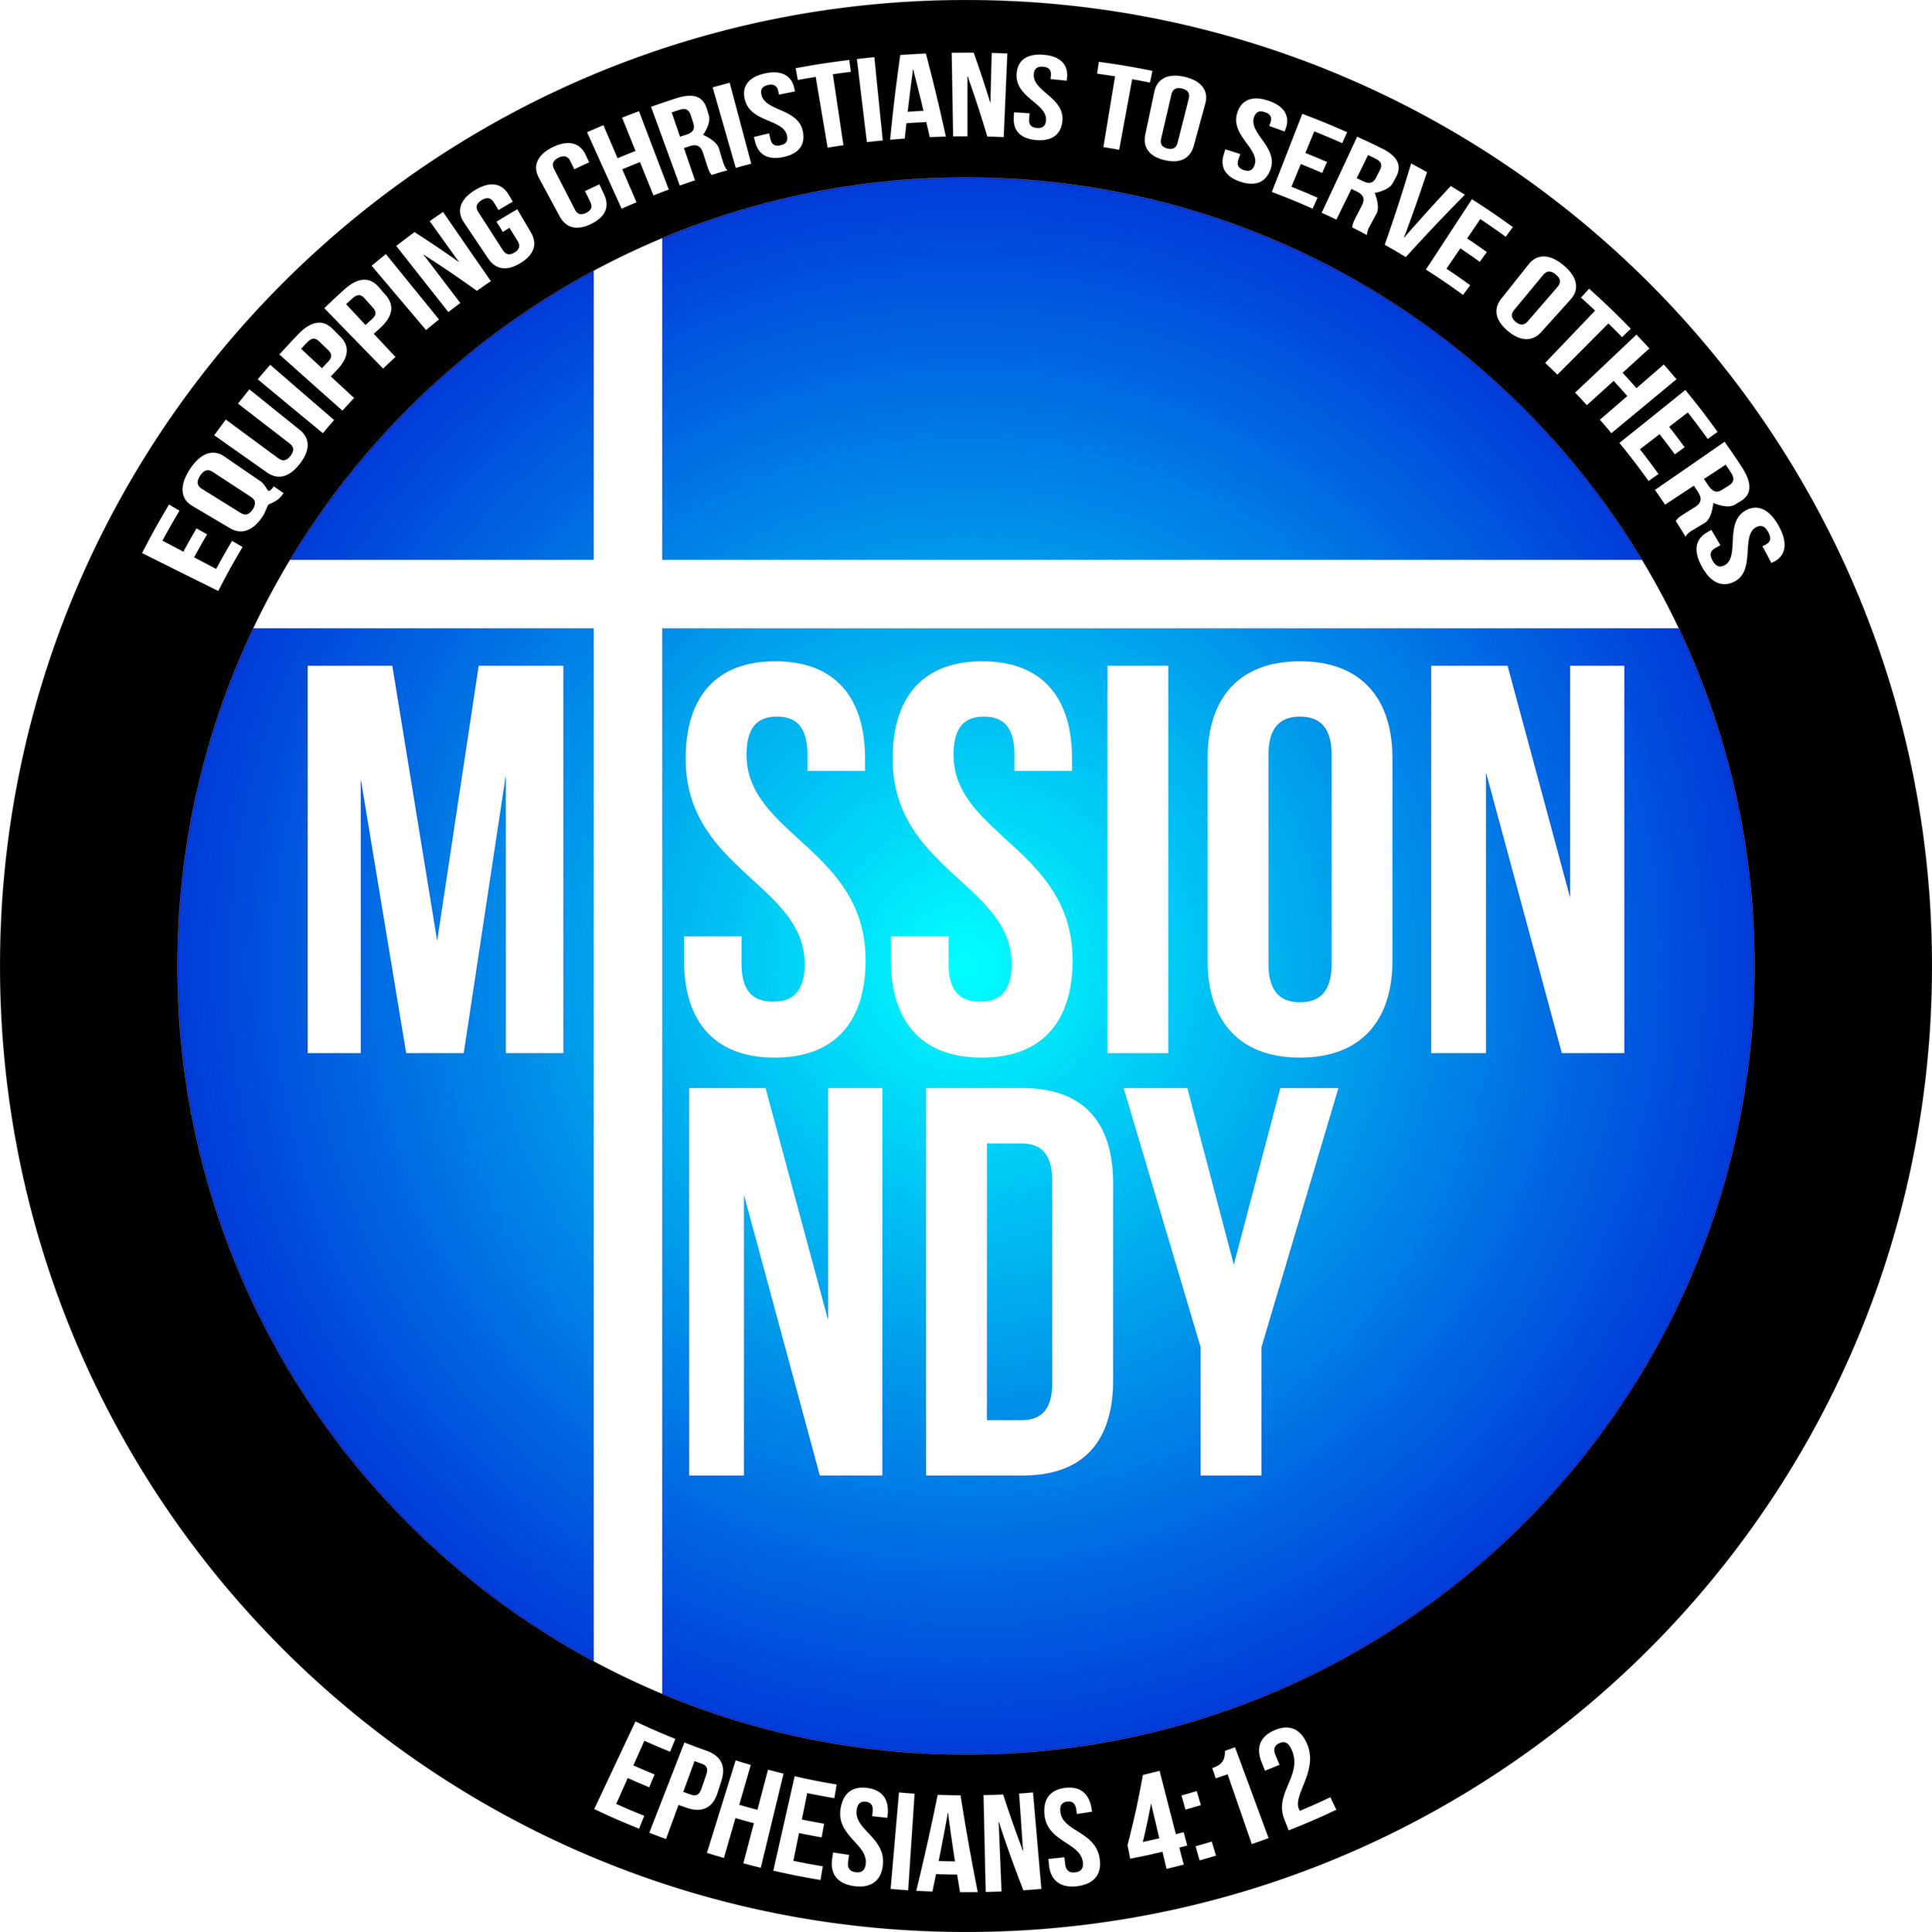 Mission Indy